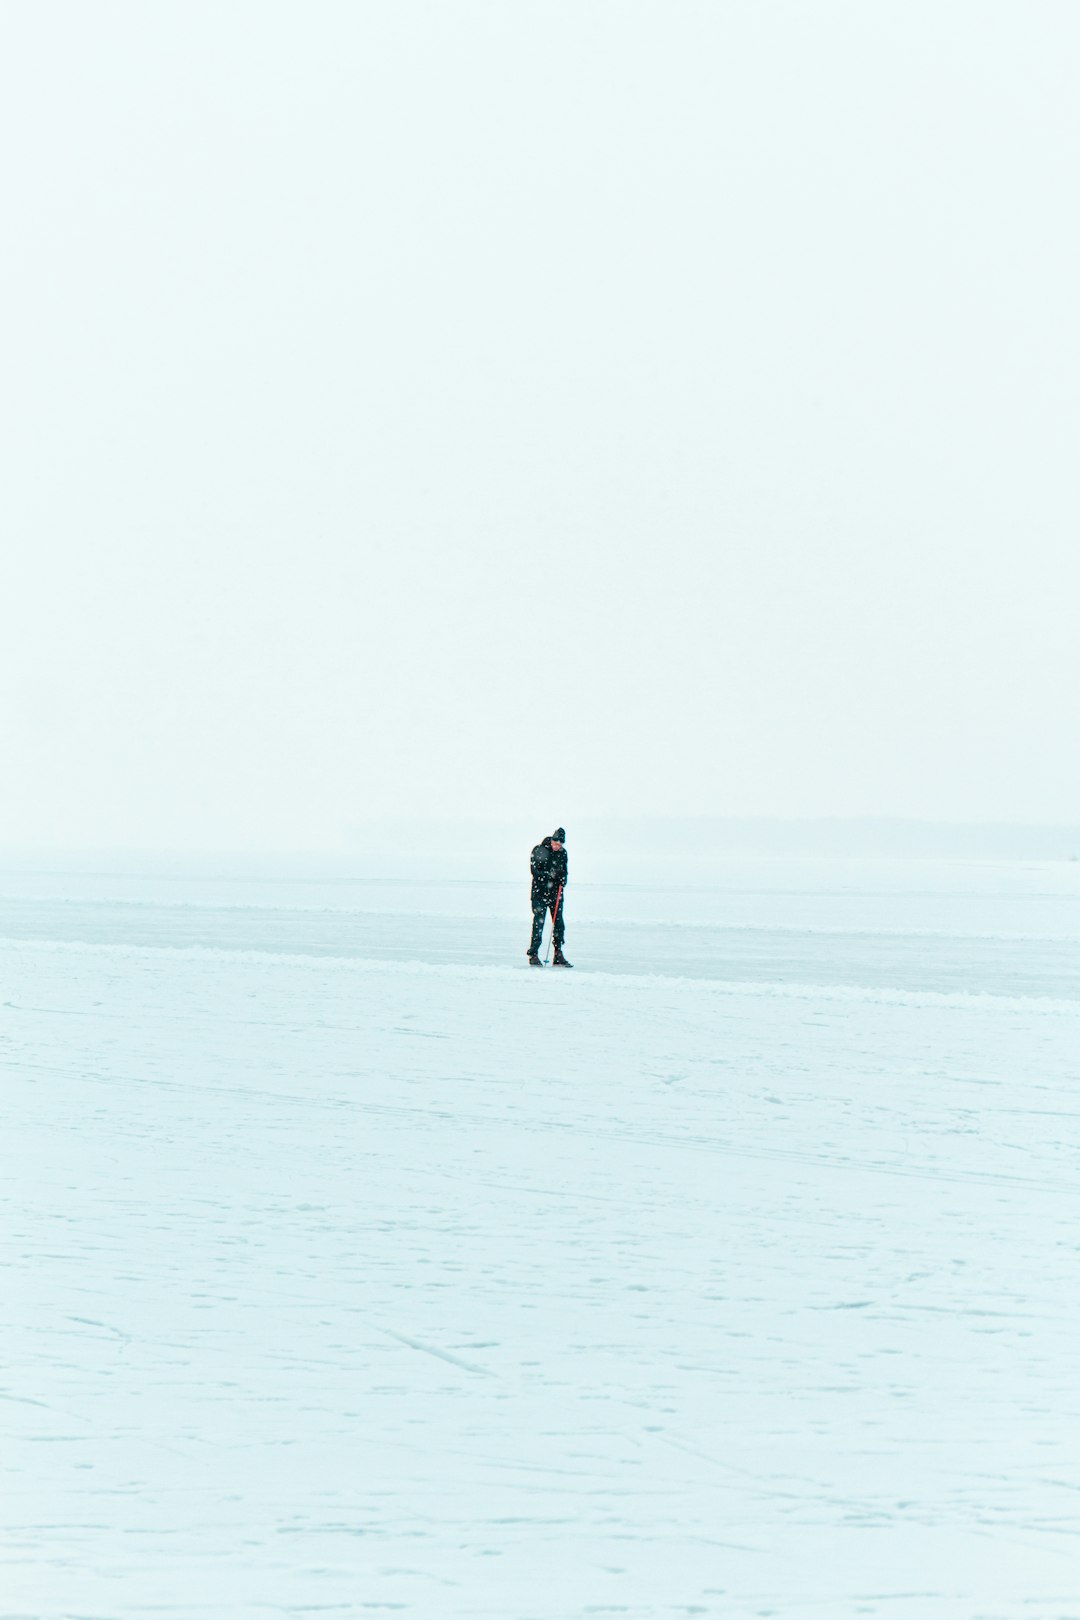 person in black jacket walking on snow covered field during daytime